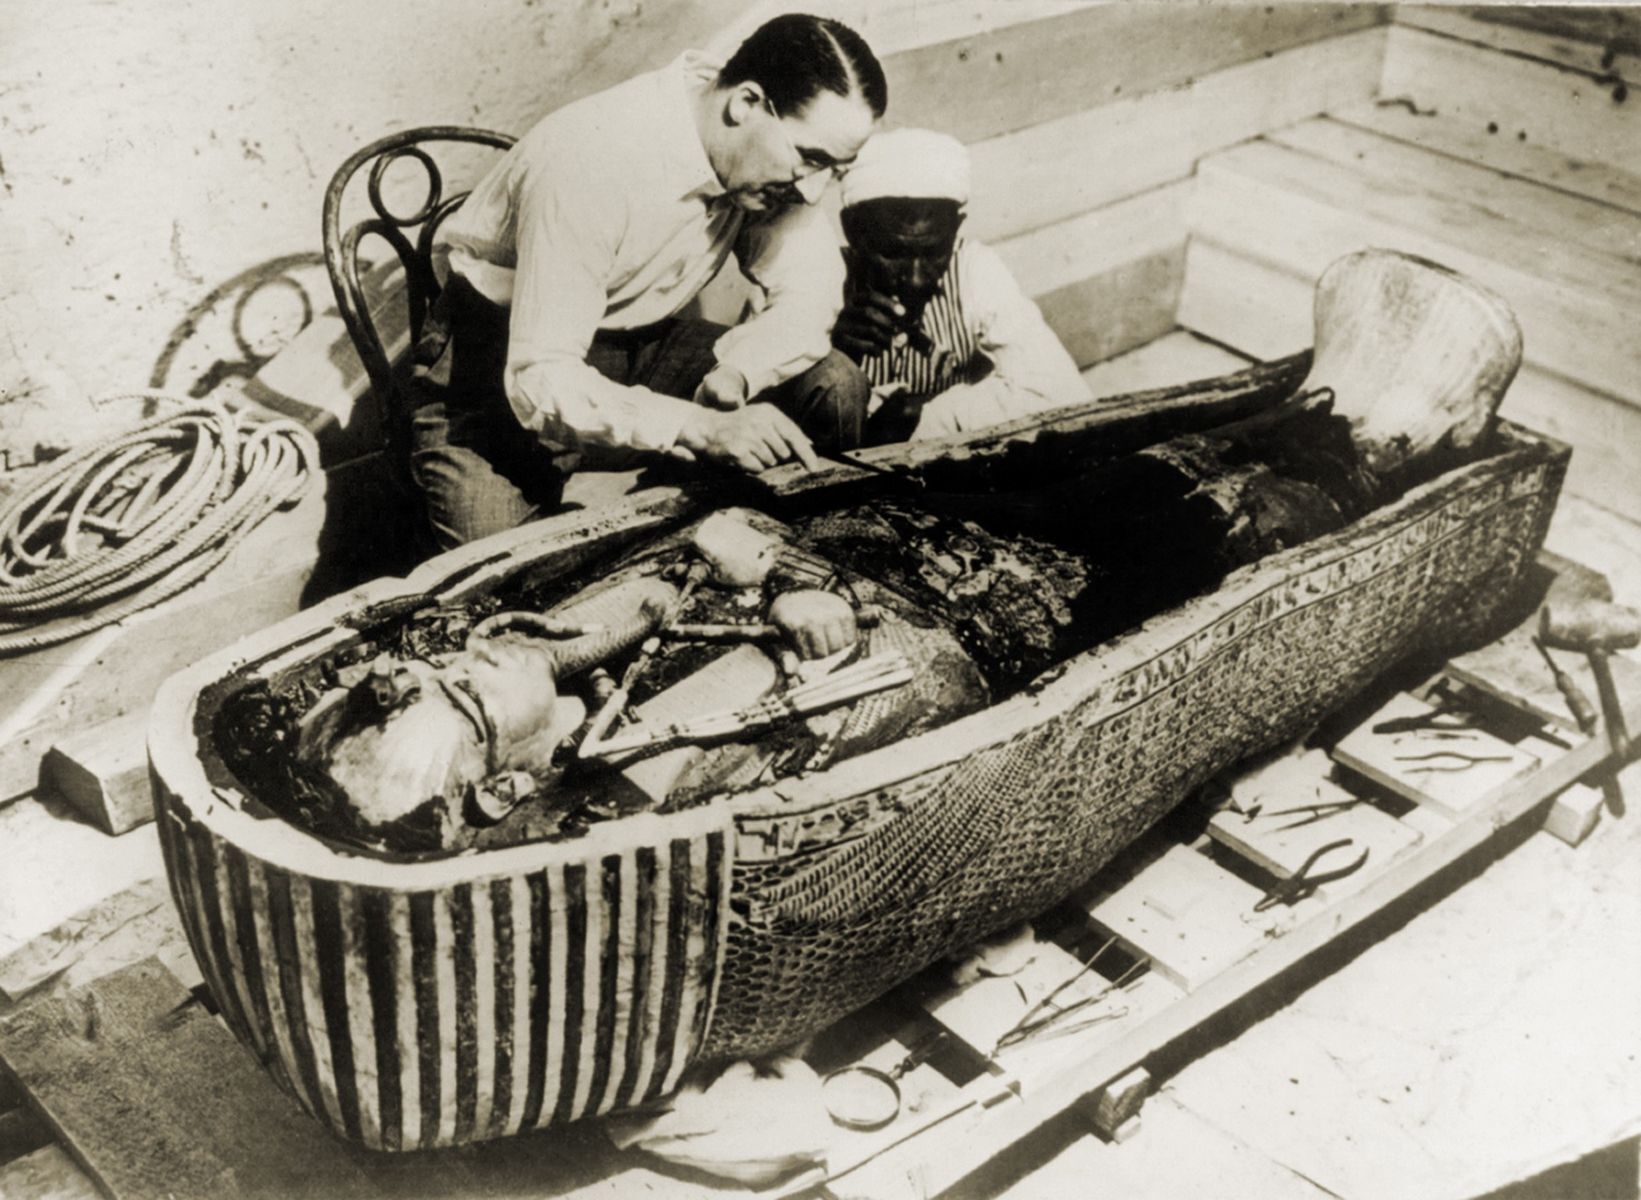 <p>In November 1922, Howard Carter (left), a British Egyptologist, and his team began excavating the tomb of <a href="https://www.nationalgeographic.org/thisday/nov4/king-tuts-tomb-discovered/">King Tutankhamun</a> (aka King Tut) in Egypt’s Valley of the Kings. Not long after, they discovered his tomb, filled with golden treasures, along with his sarcophagus and mummy.</p>